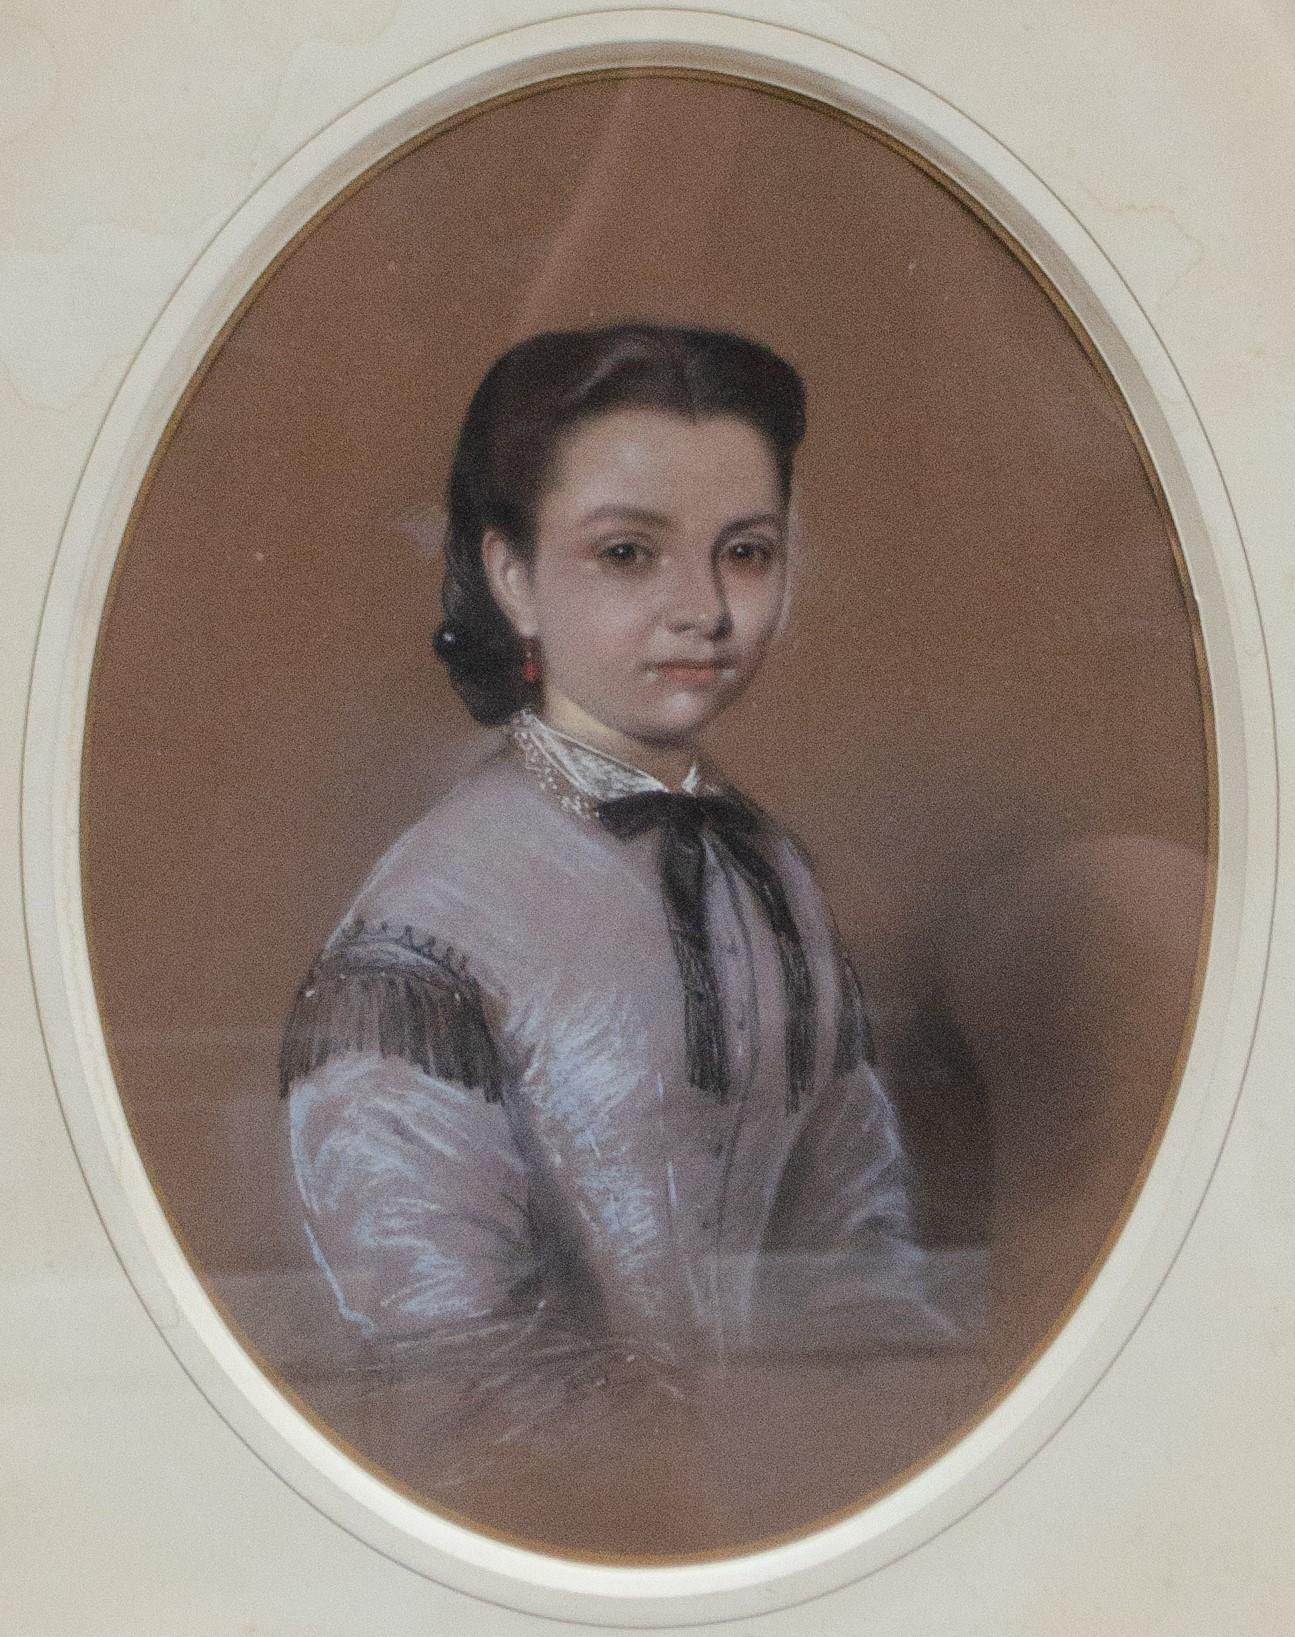 Unknown Portrait Painting - Portrait Of A Young Girl  In A Lilac Dress With A Black Bow. Circa 1860. SIgned.